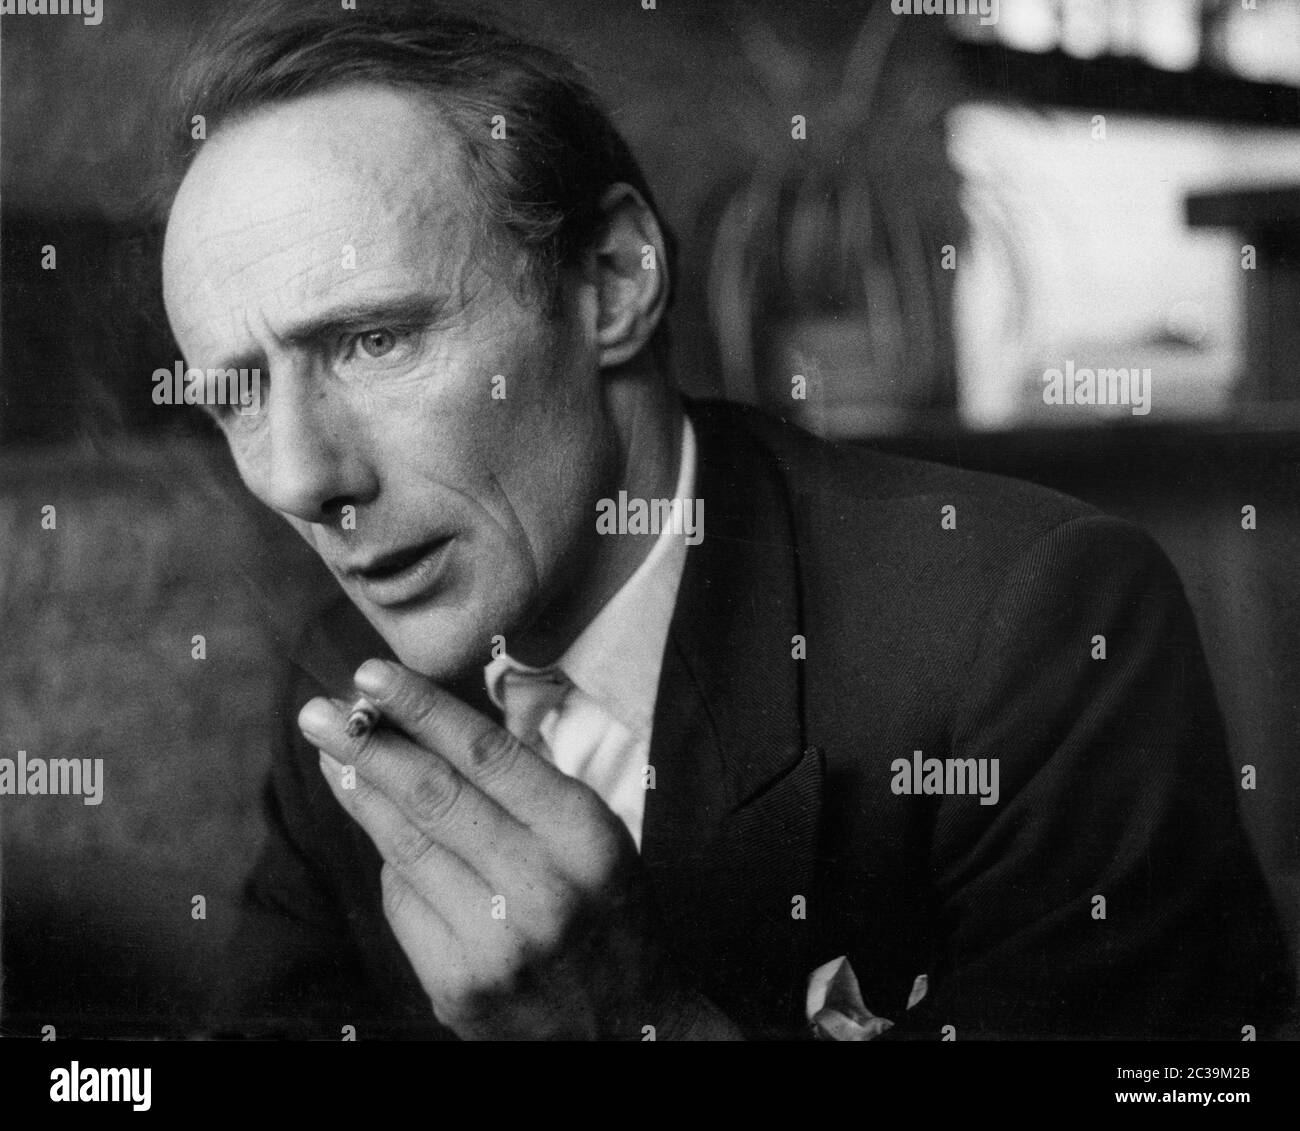 Close up of a man in a suit smoking a cigarette. The picture was taken from a report called 'Wie geht es Ihnen Herr Hansen?' ('How are you, Mr. Hansen?'). Undated photo. Stock Photo